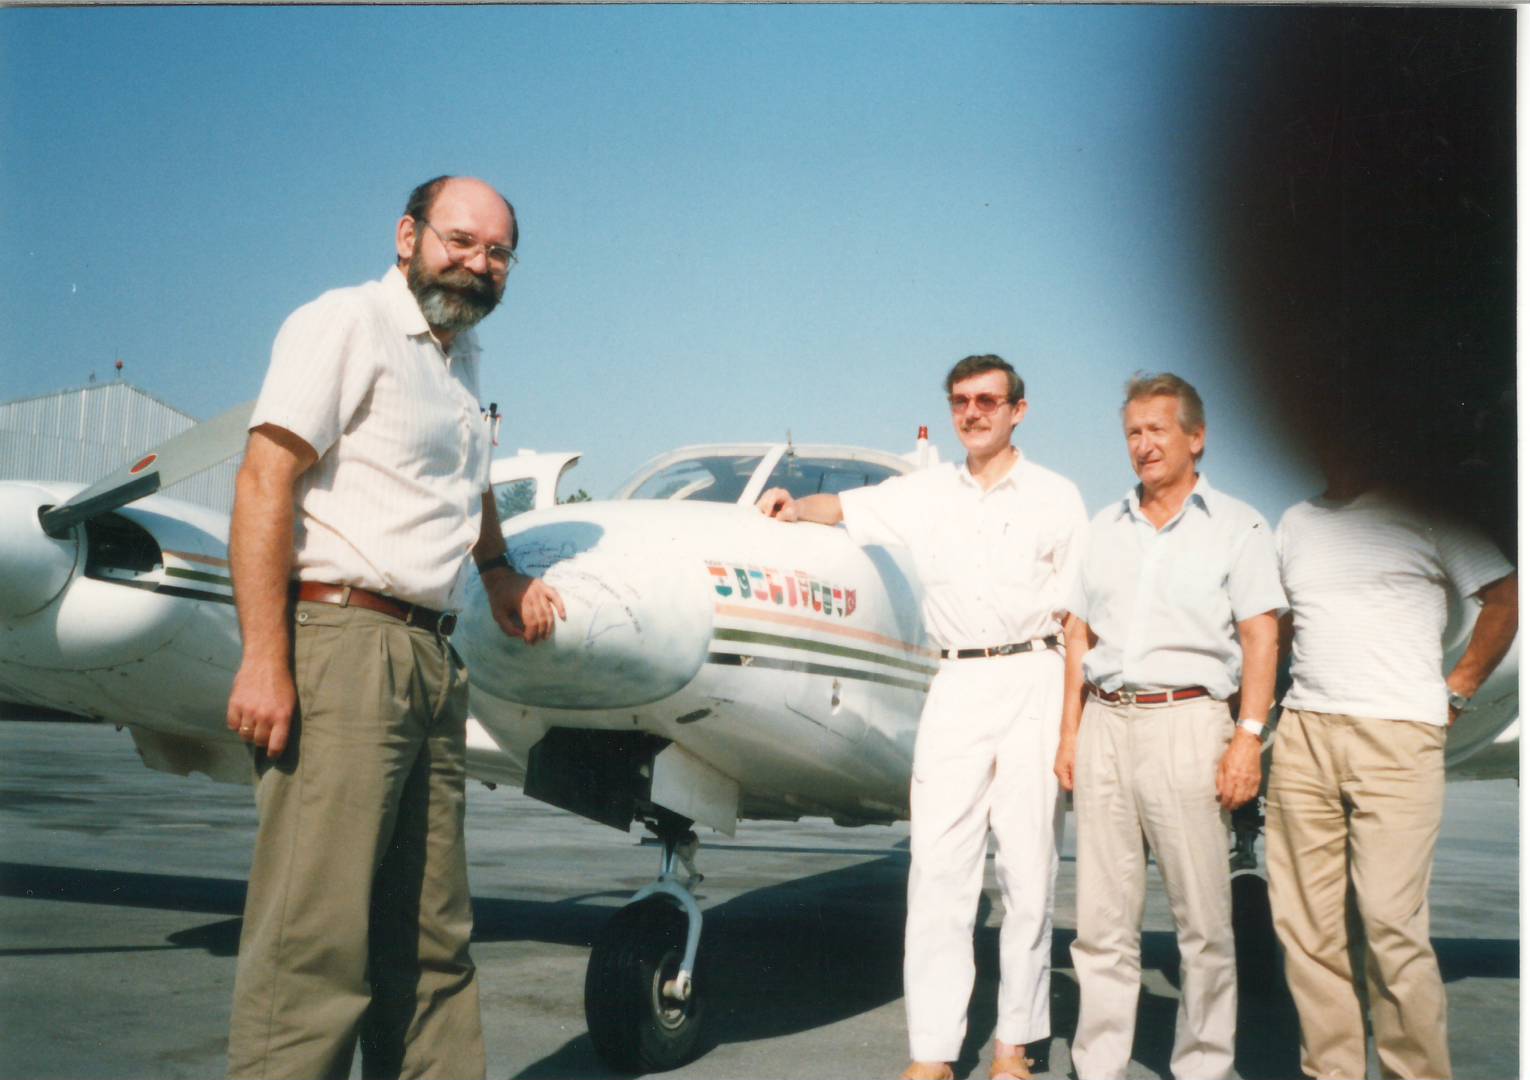 PZL M-20 Mewa- flight from Poland to India in 1989